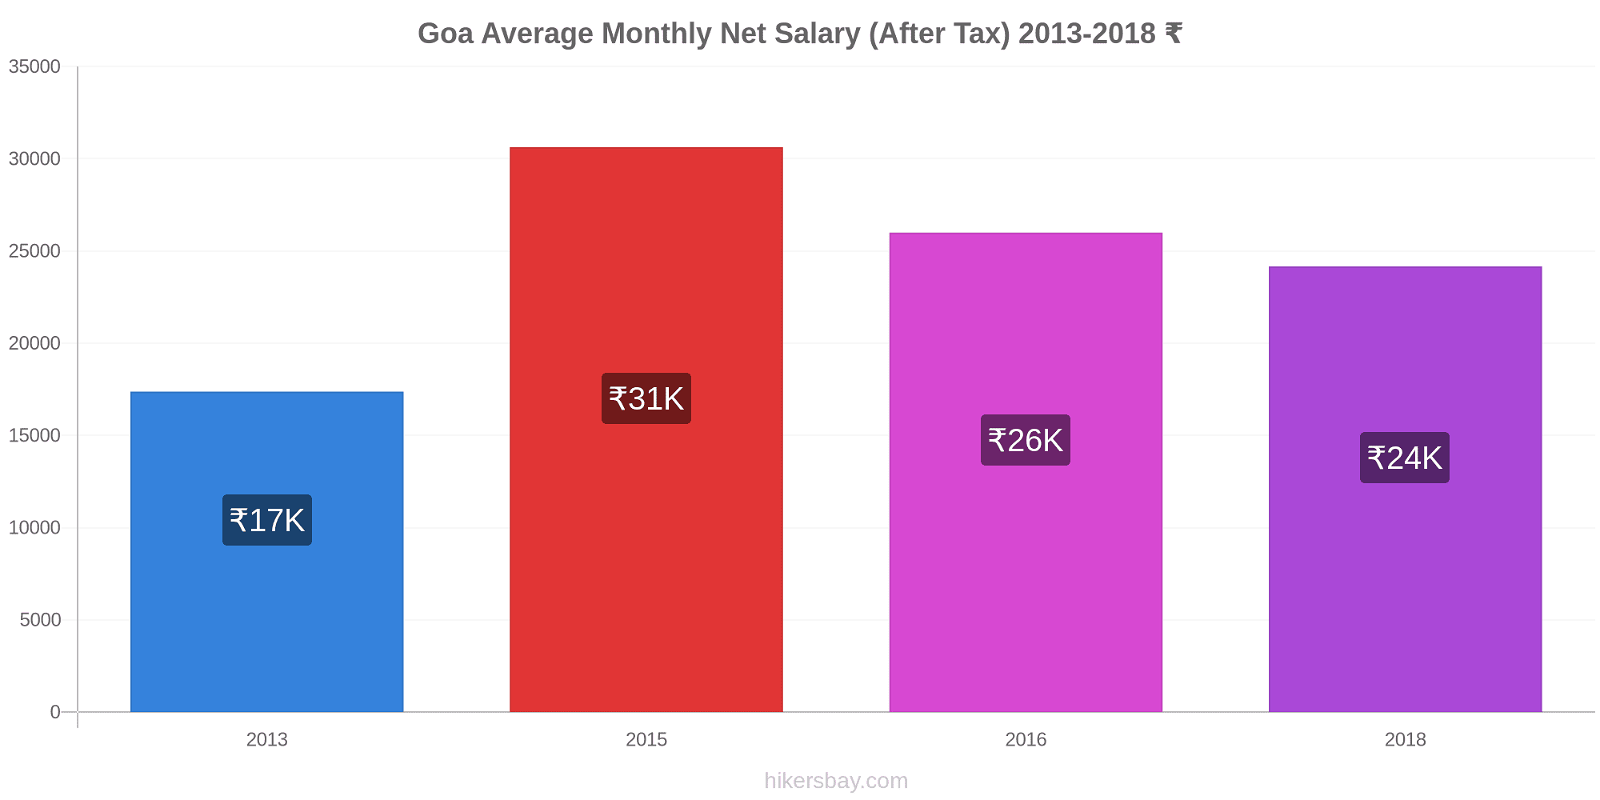 Goa price changes Average Monthly Net Salary (After Tax) hikersbay.com